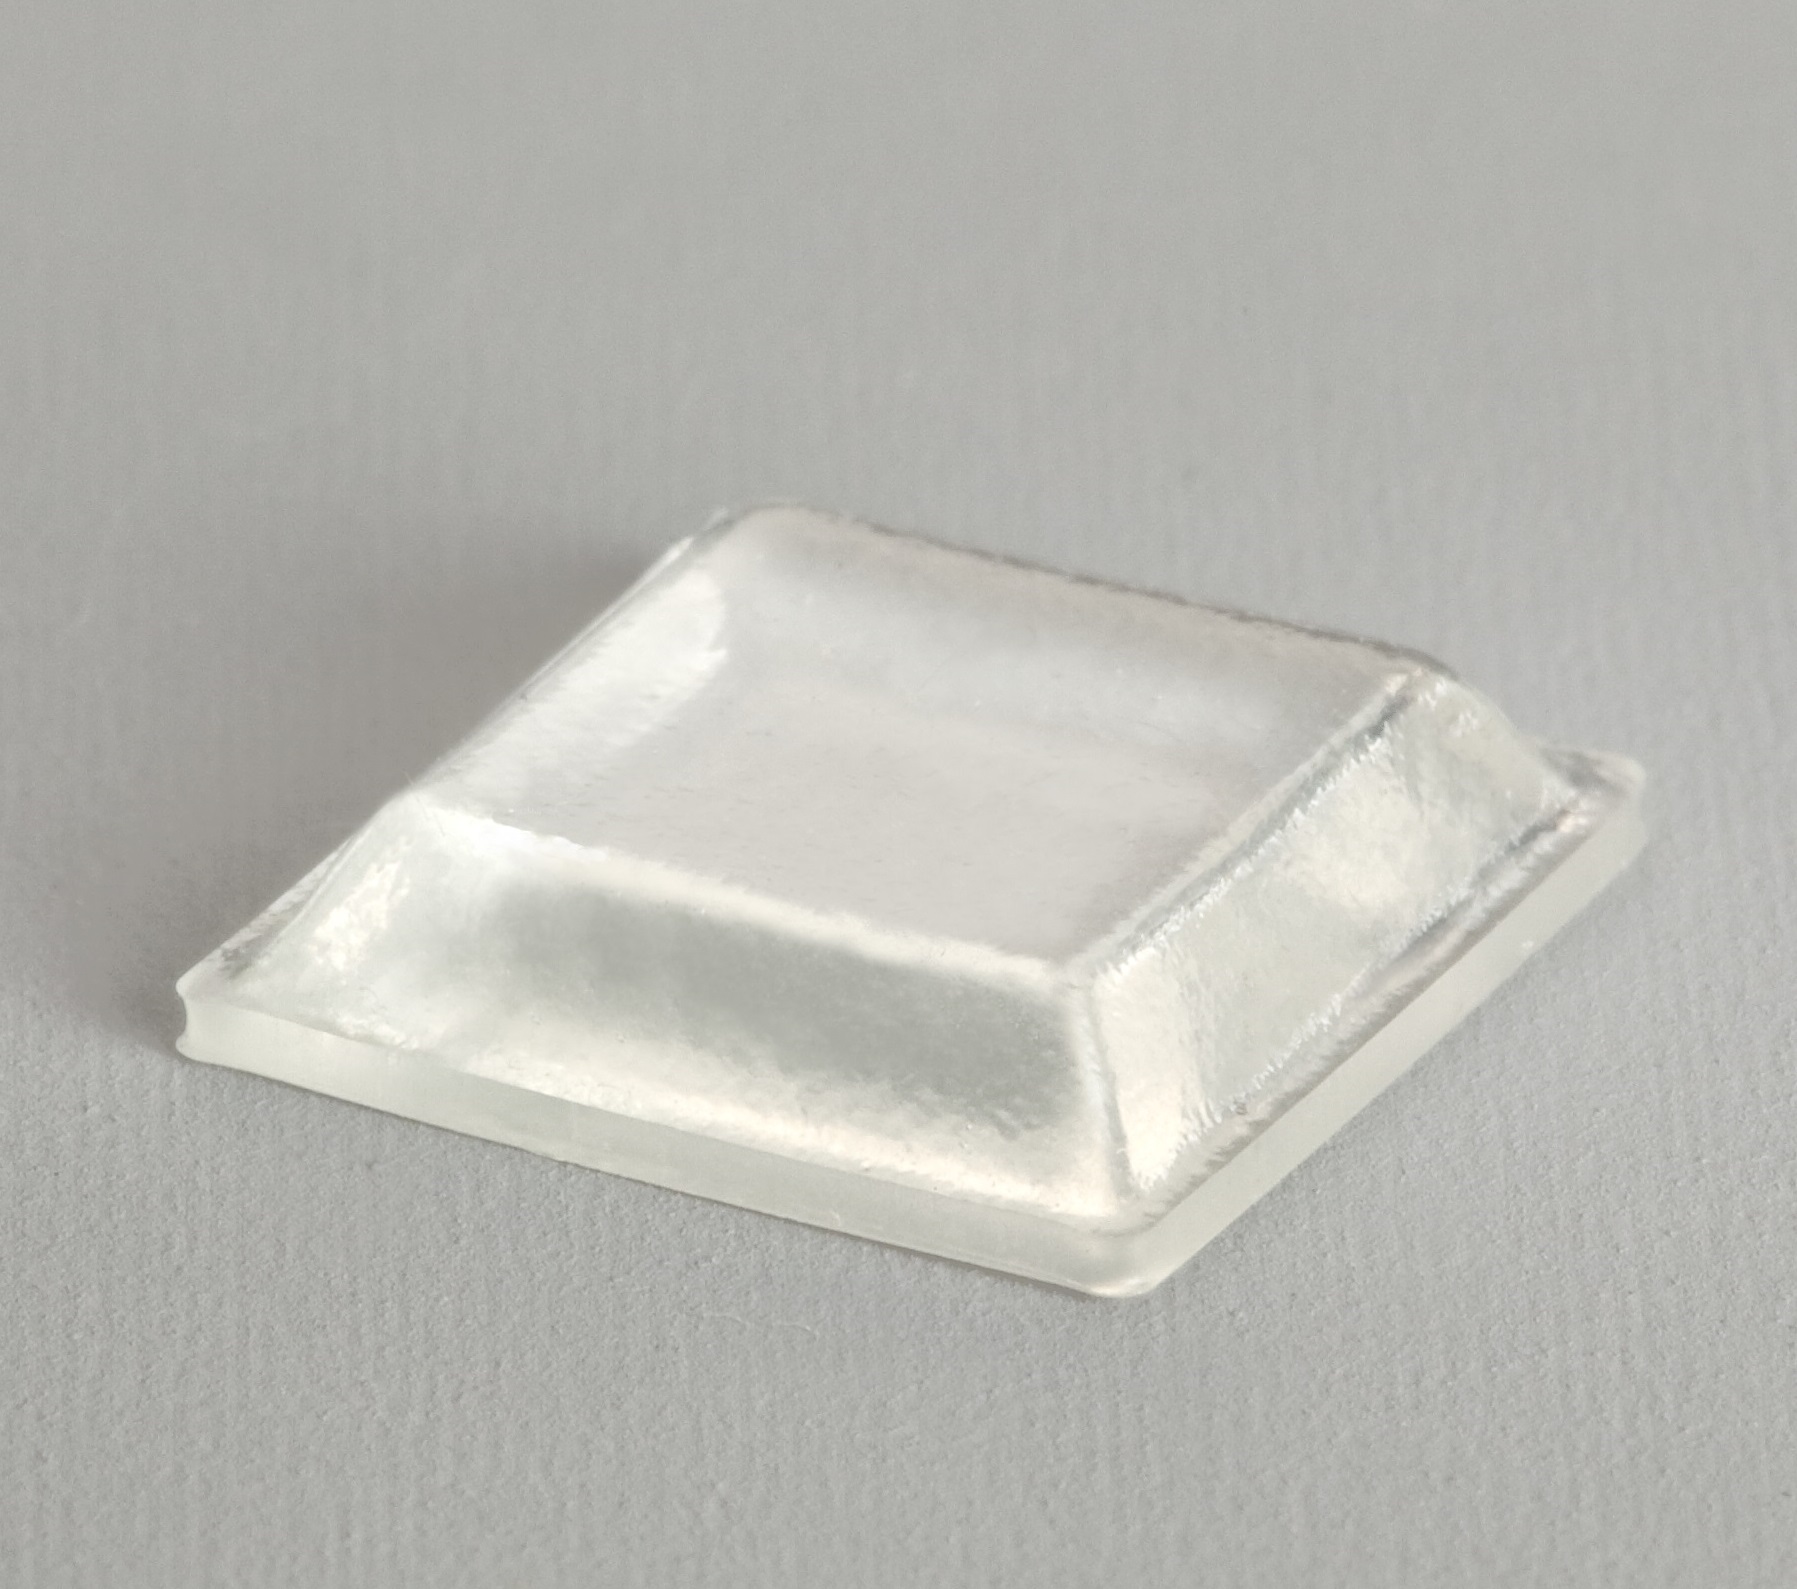 BS-32 CLEAR product image